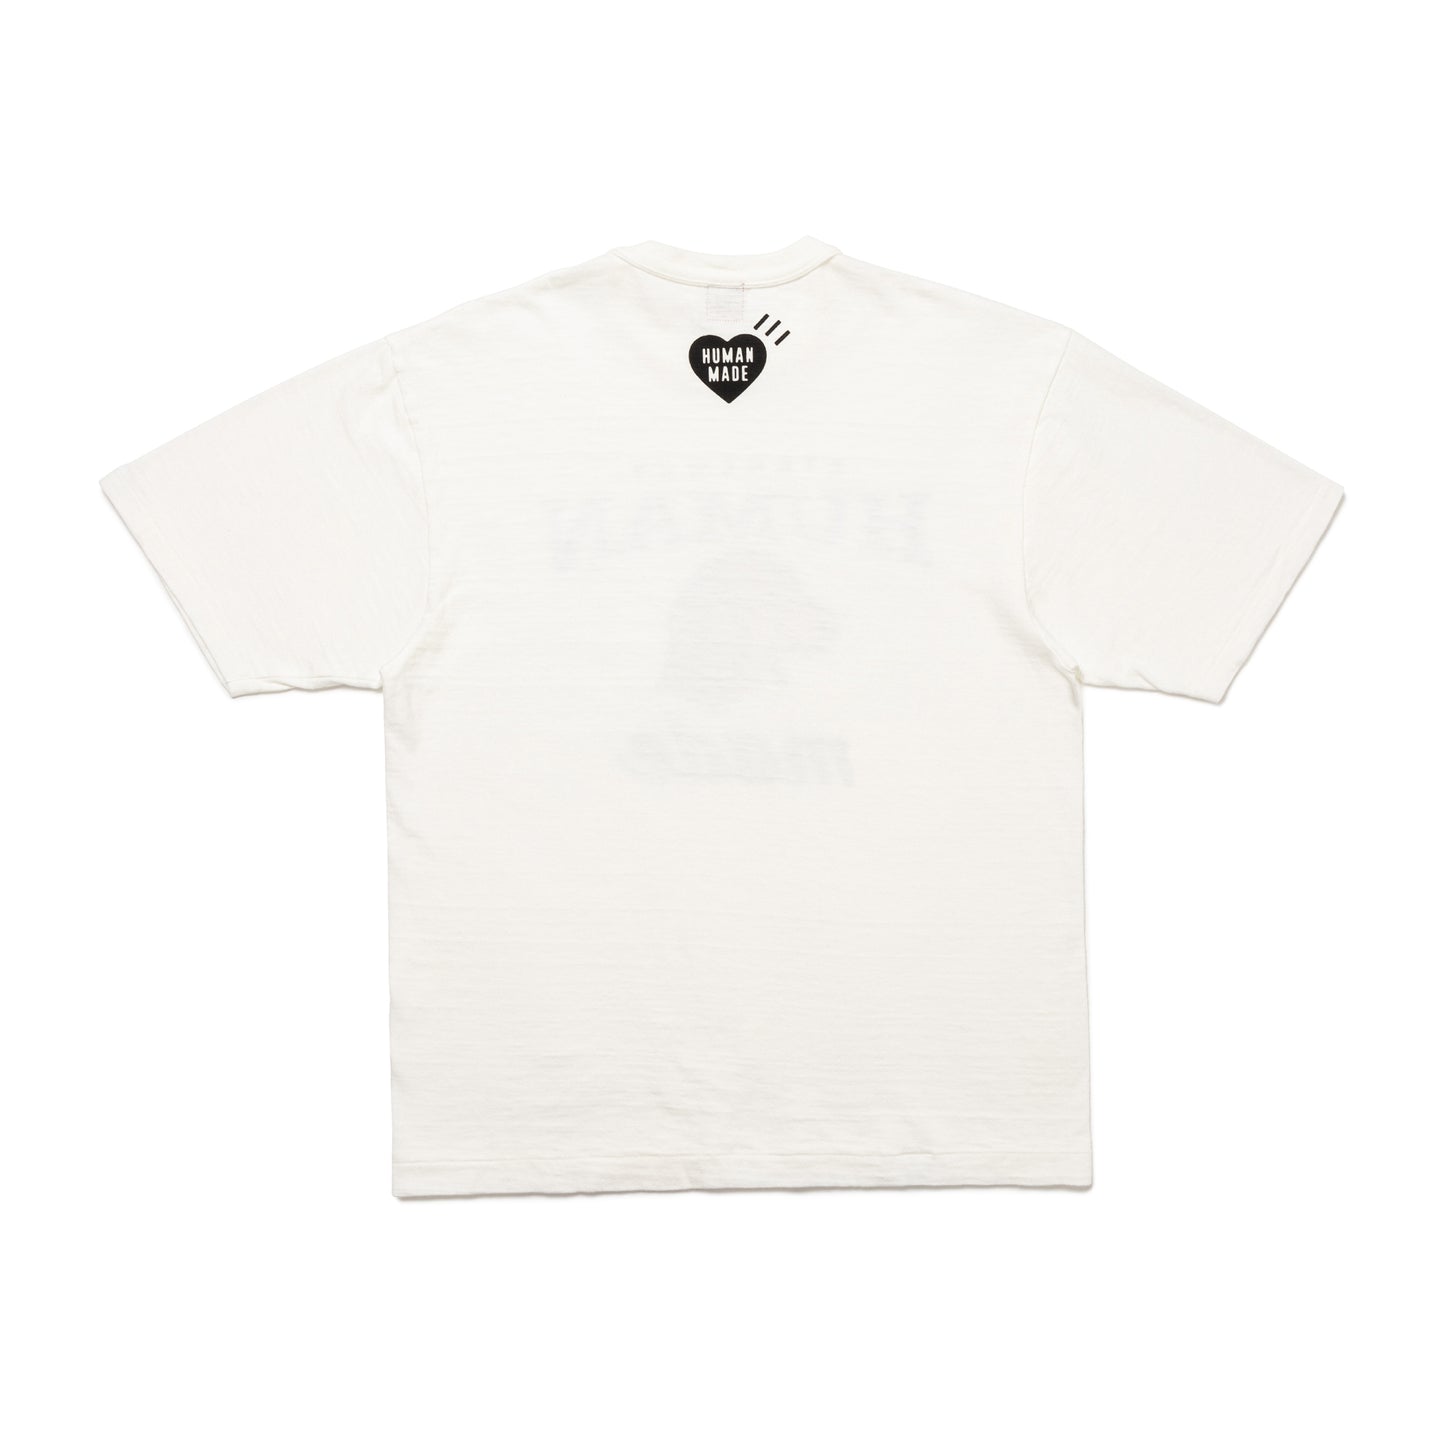 HUMANMADE Wasted Youth T-SHIRT#6 White L